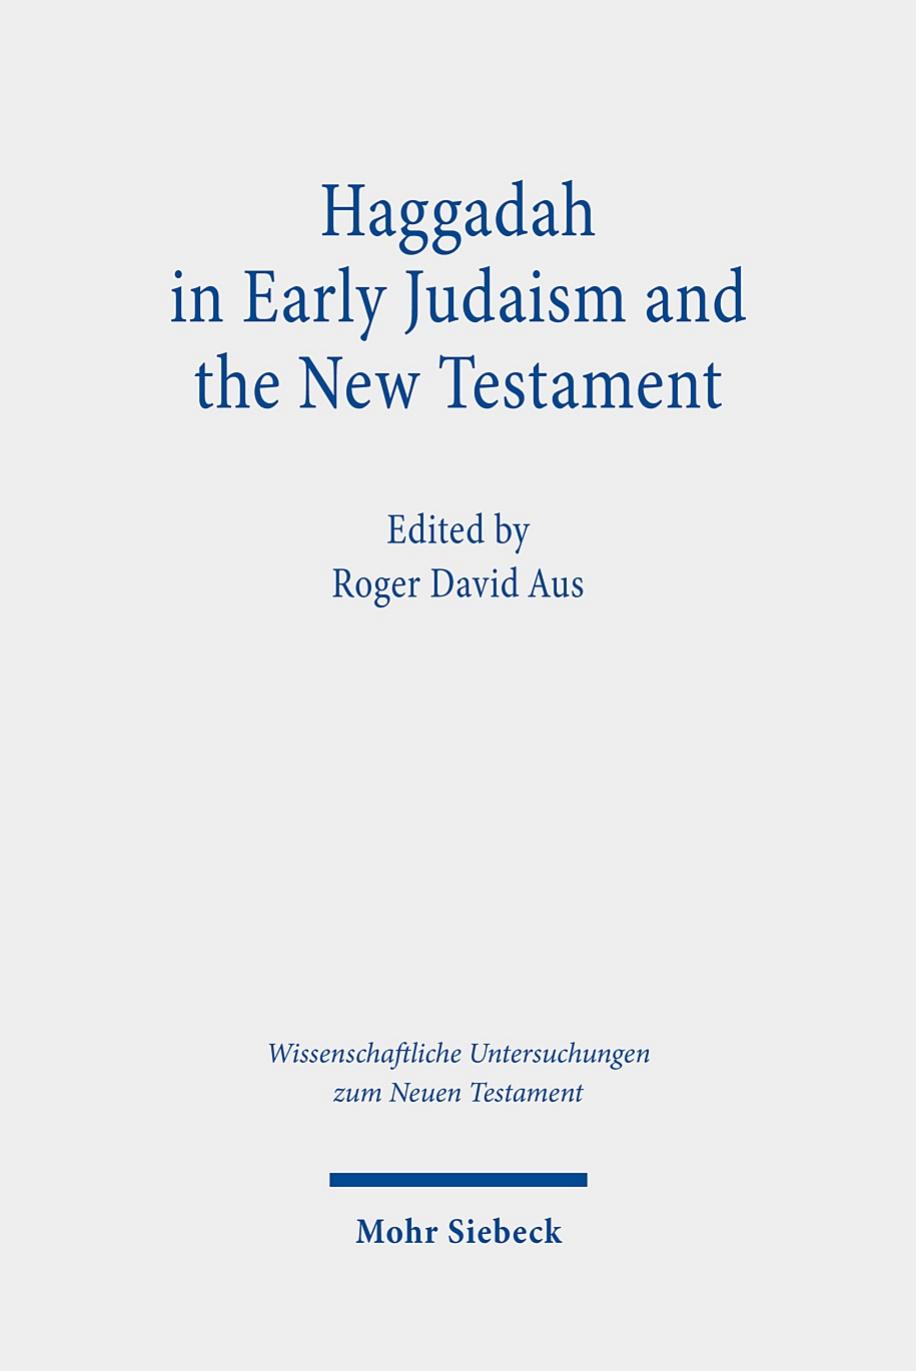 Haggadah in Early Judaism and the New Testament by Roger David Aus (editor)